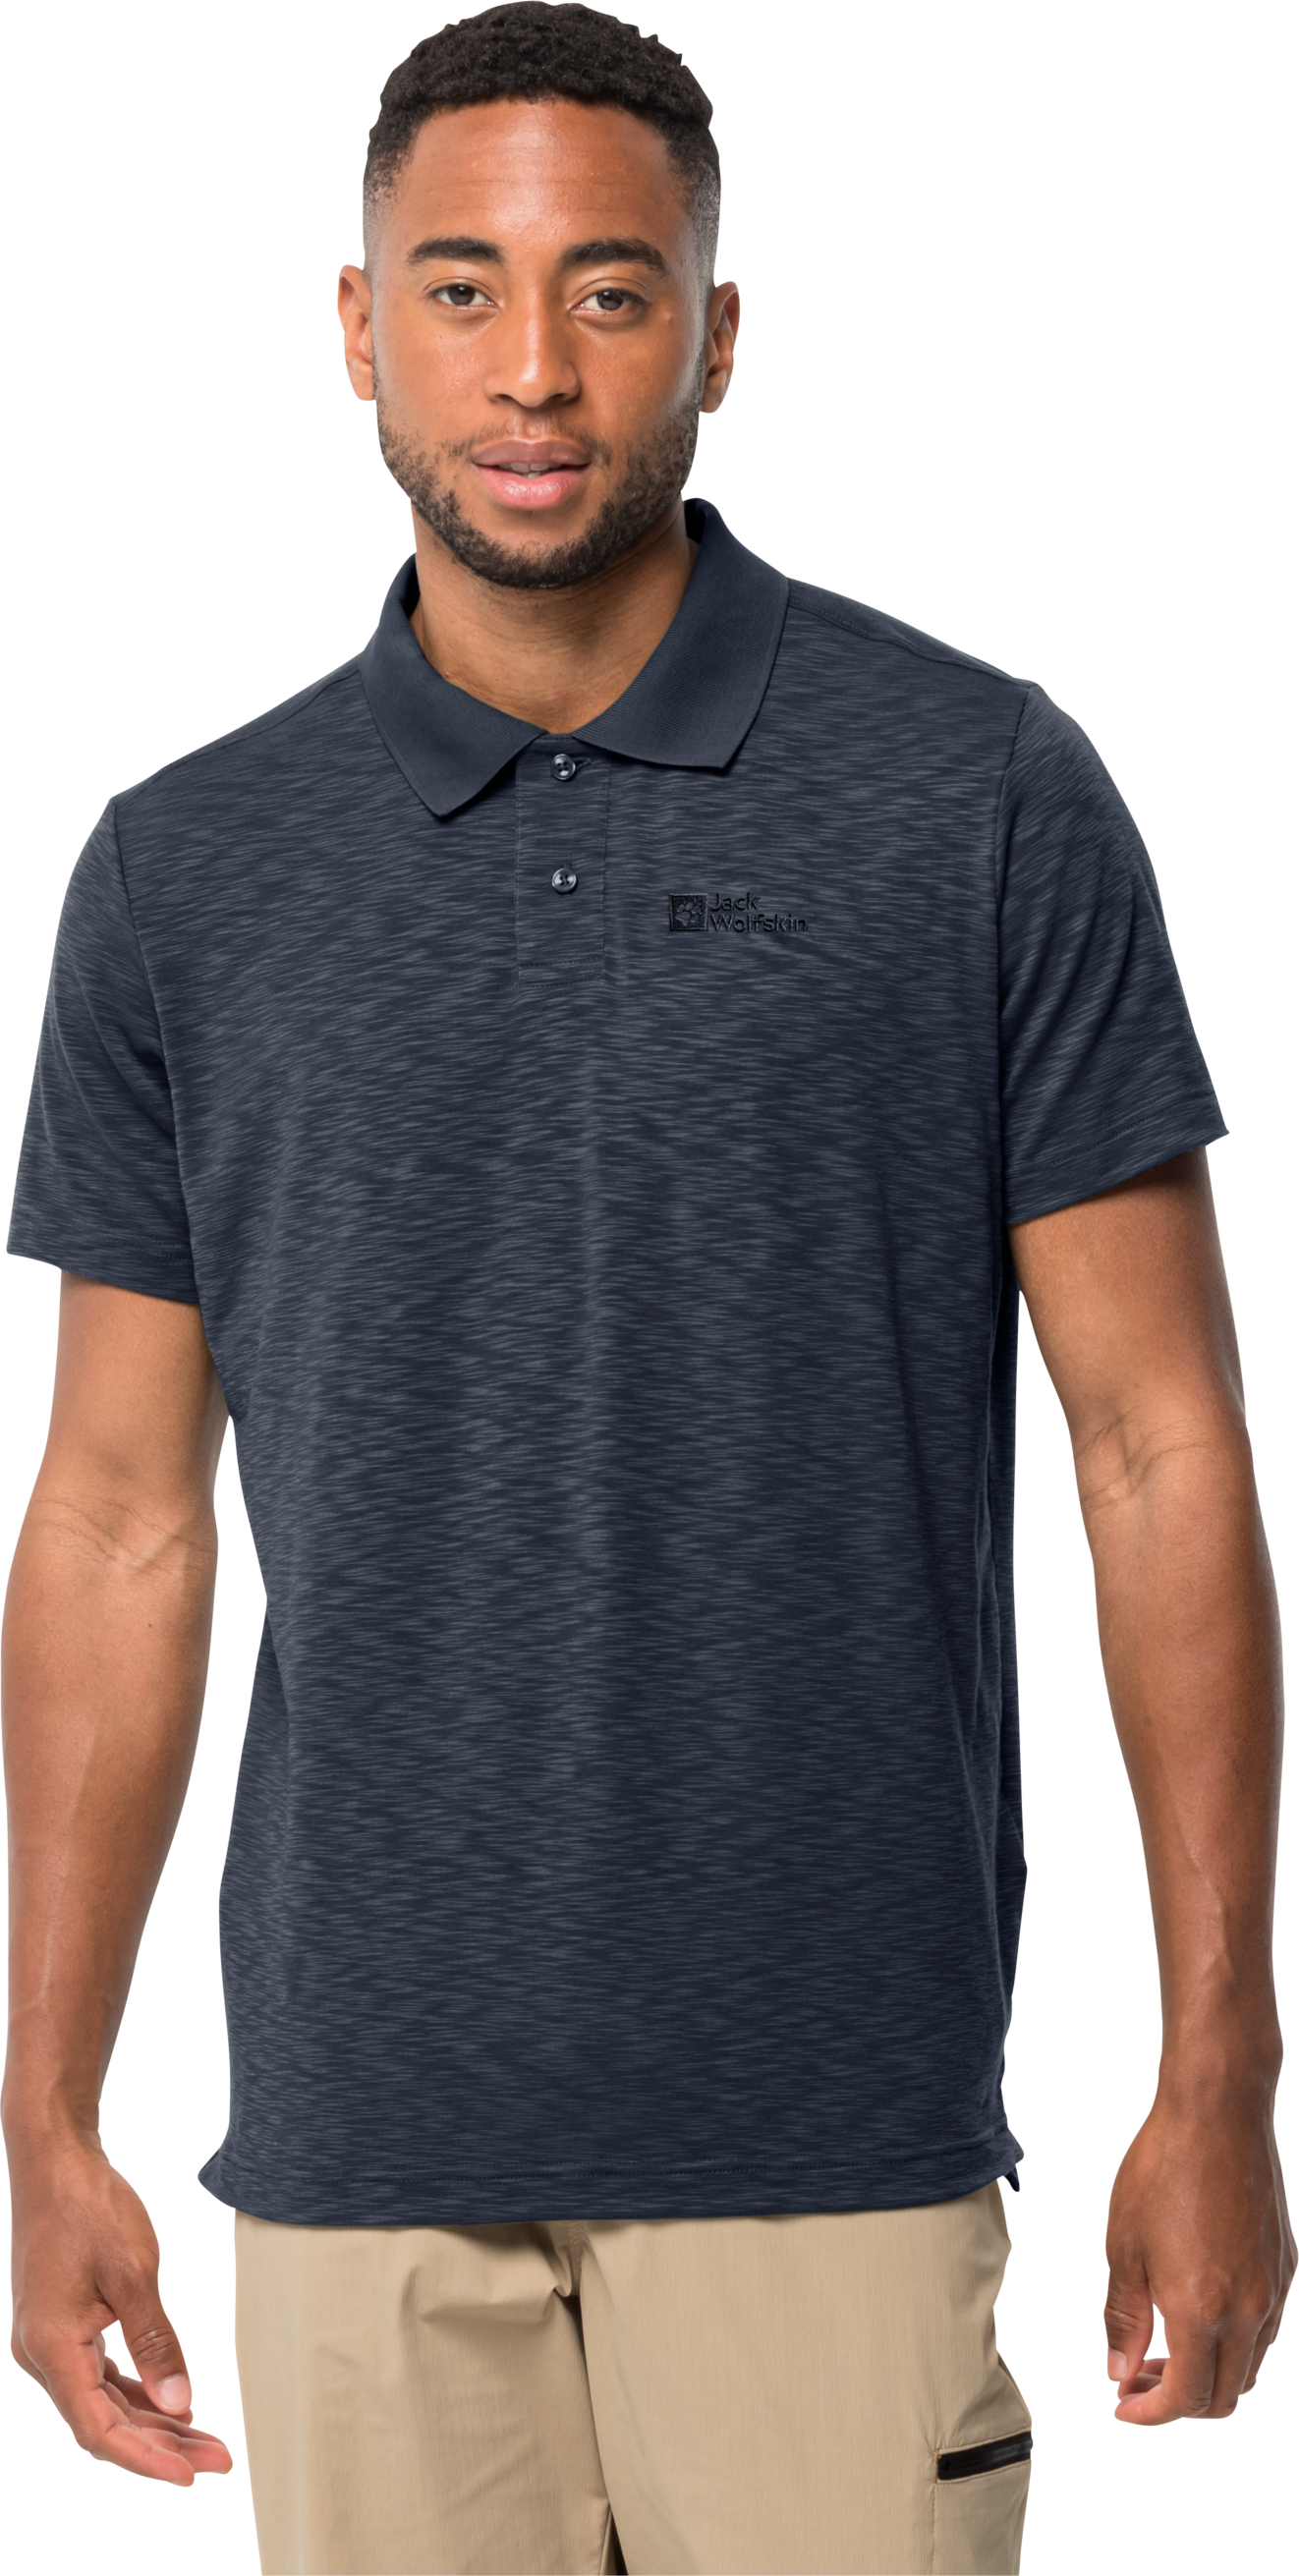 Men\'s Travel | Polo Men\'s Greenwood Polo Buy Travel Outnorth Greenwood here 